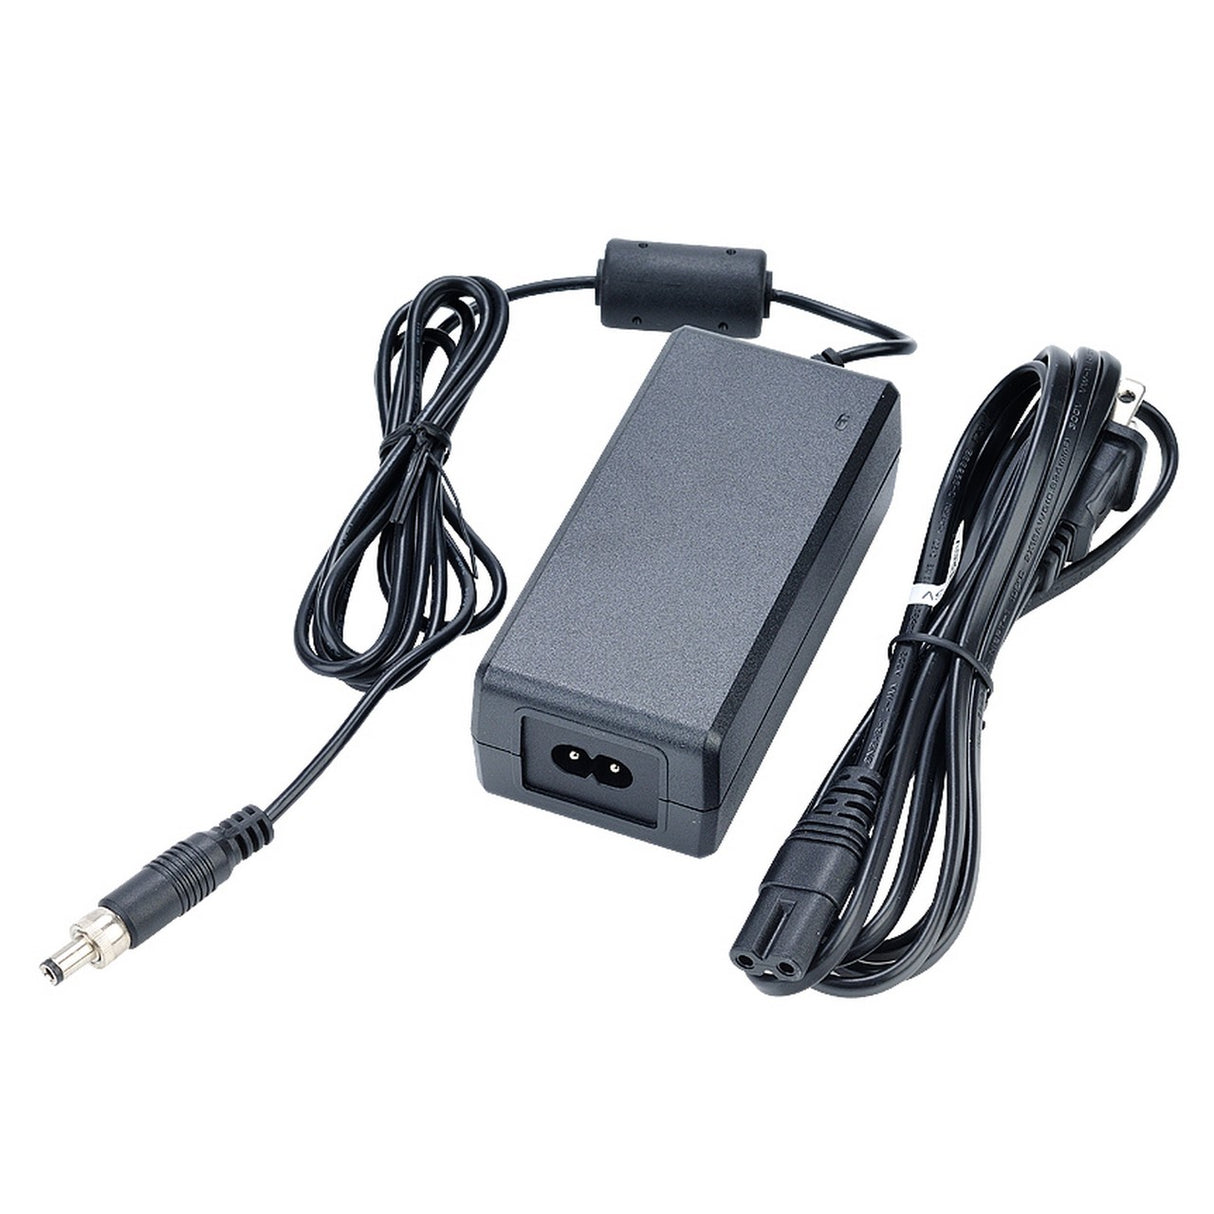 Clear-Com CZ11421 | 12VDC Power Supply with Cord